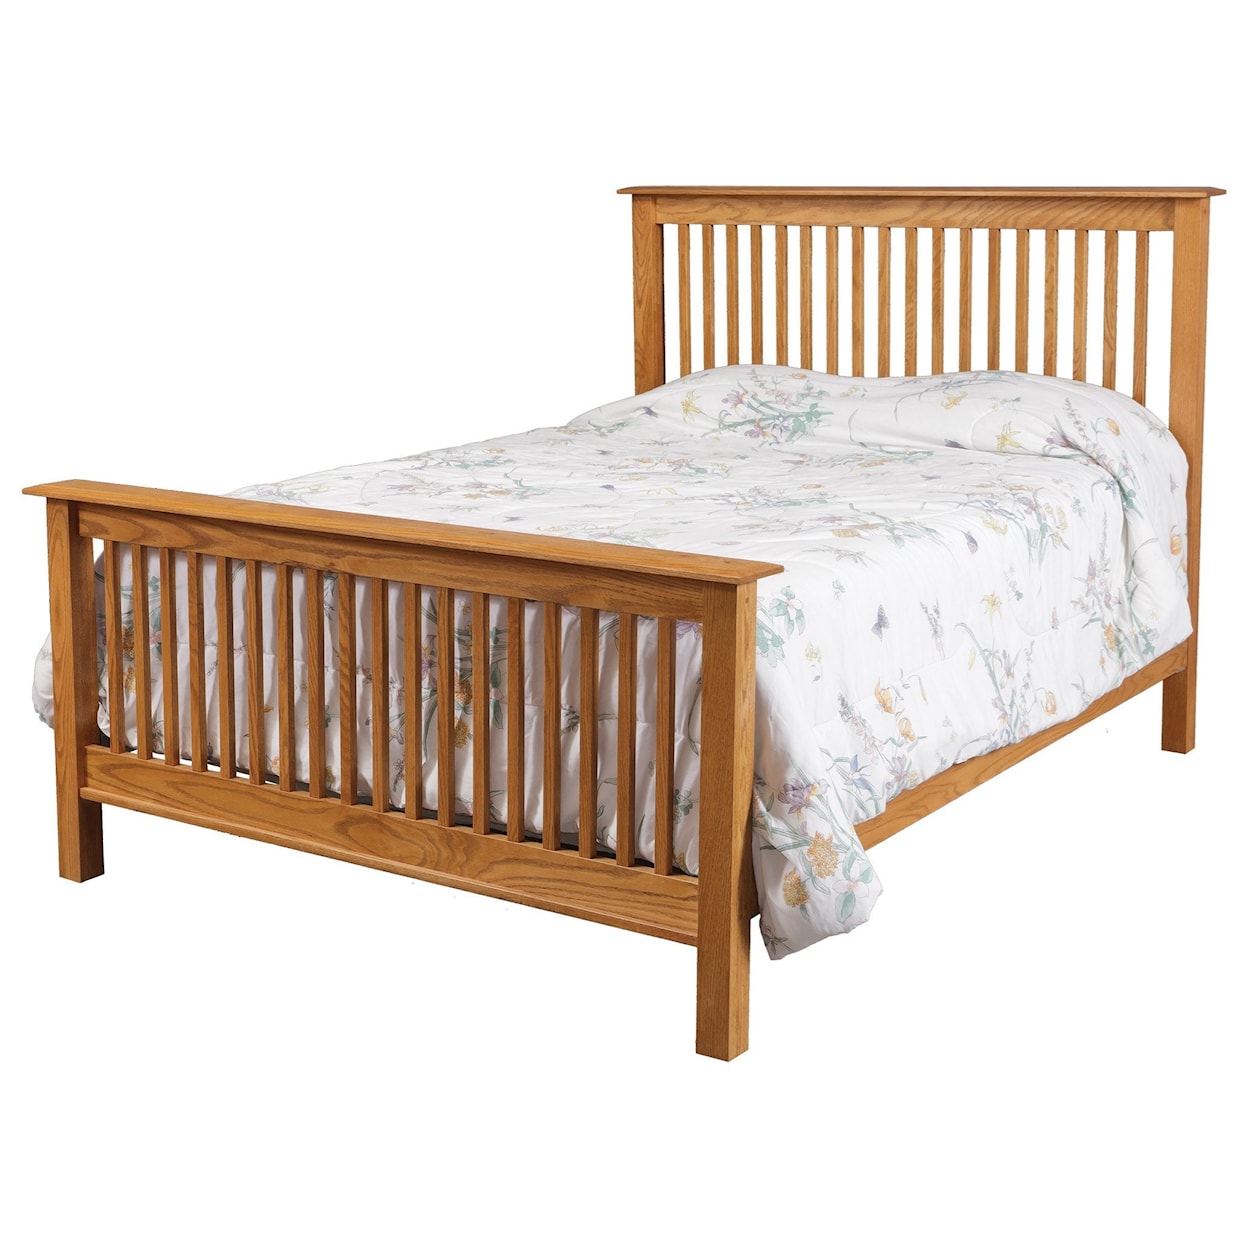 Daniel's Amish Simplicity King Bed